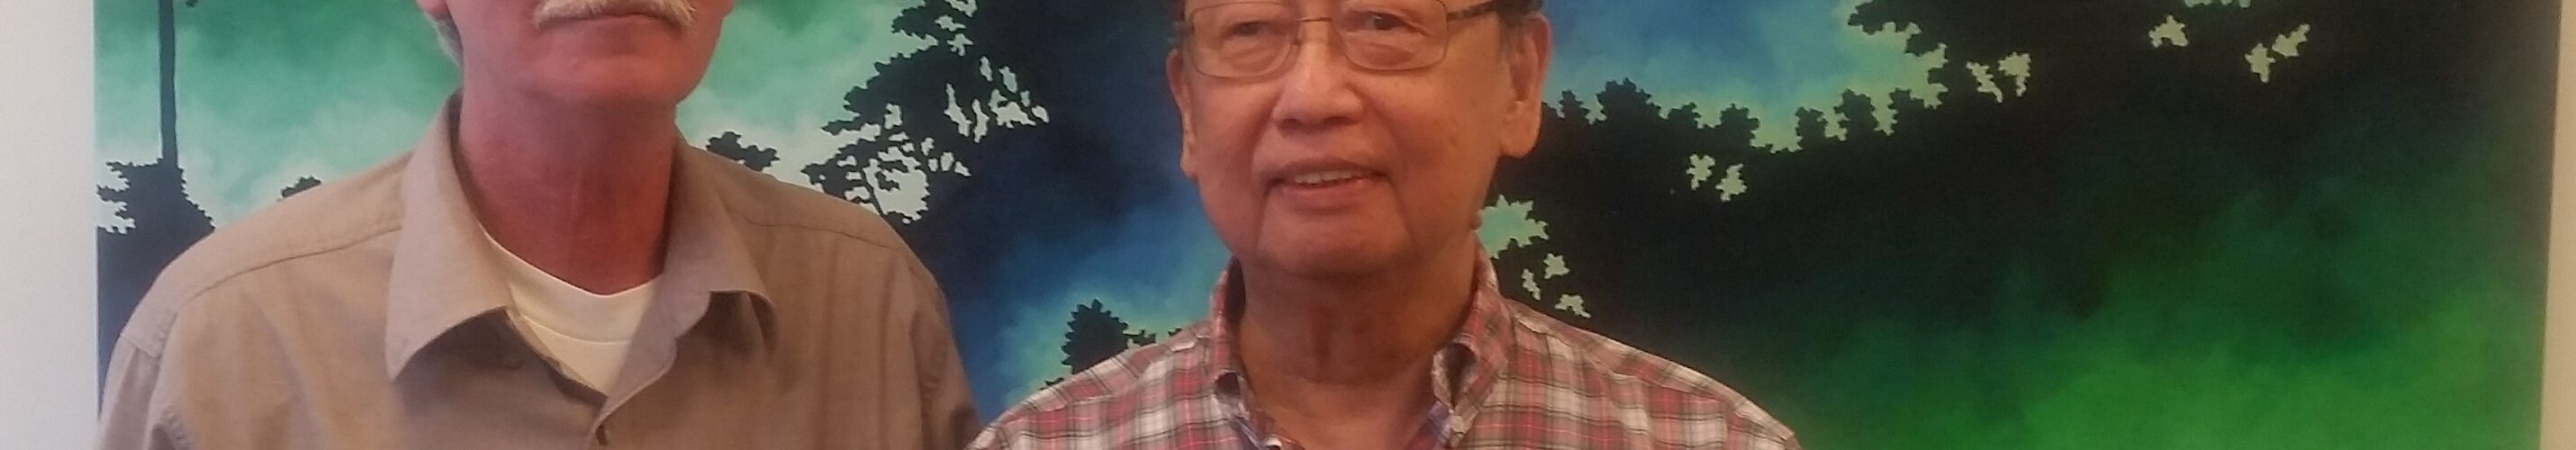 Jose Maria Sison, the founding Chairman of the Communist Party of the Philippines with FRSO Political Secretary Mick Kelly.